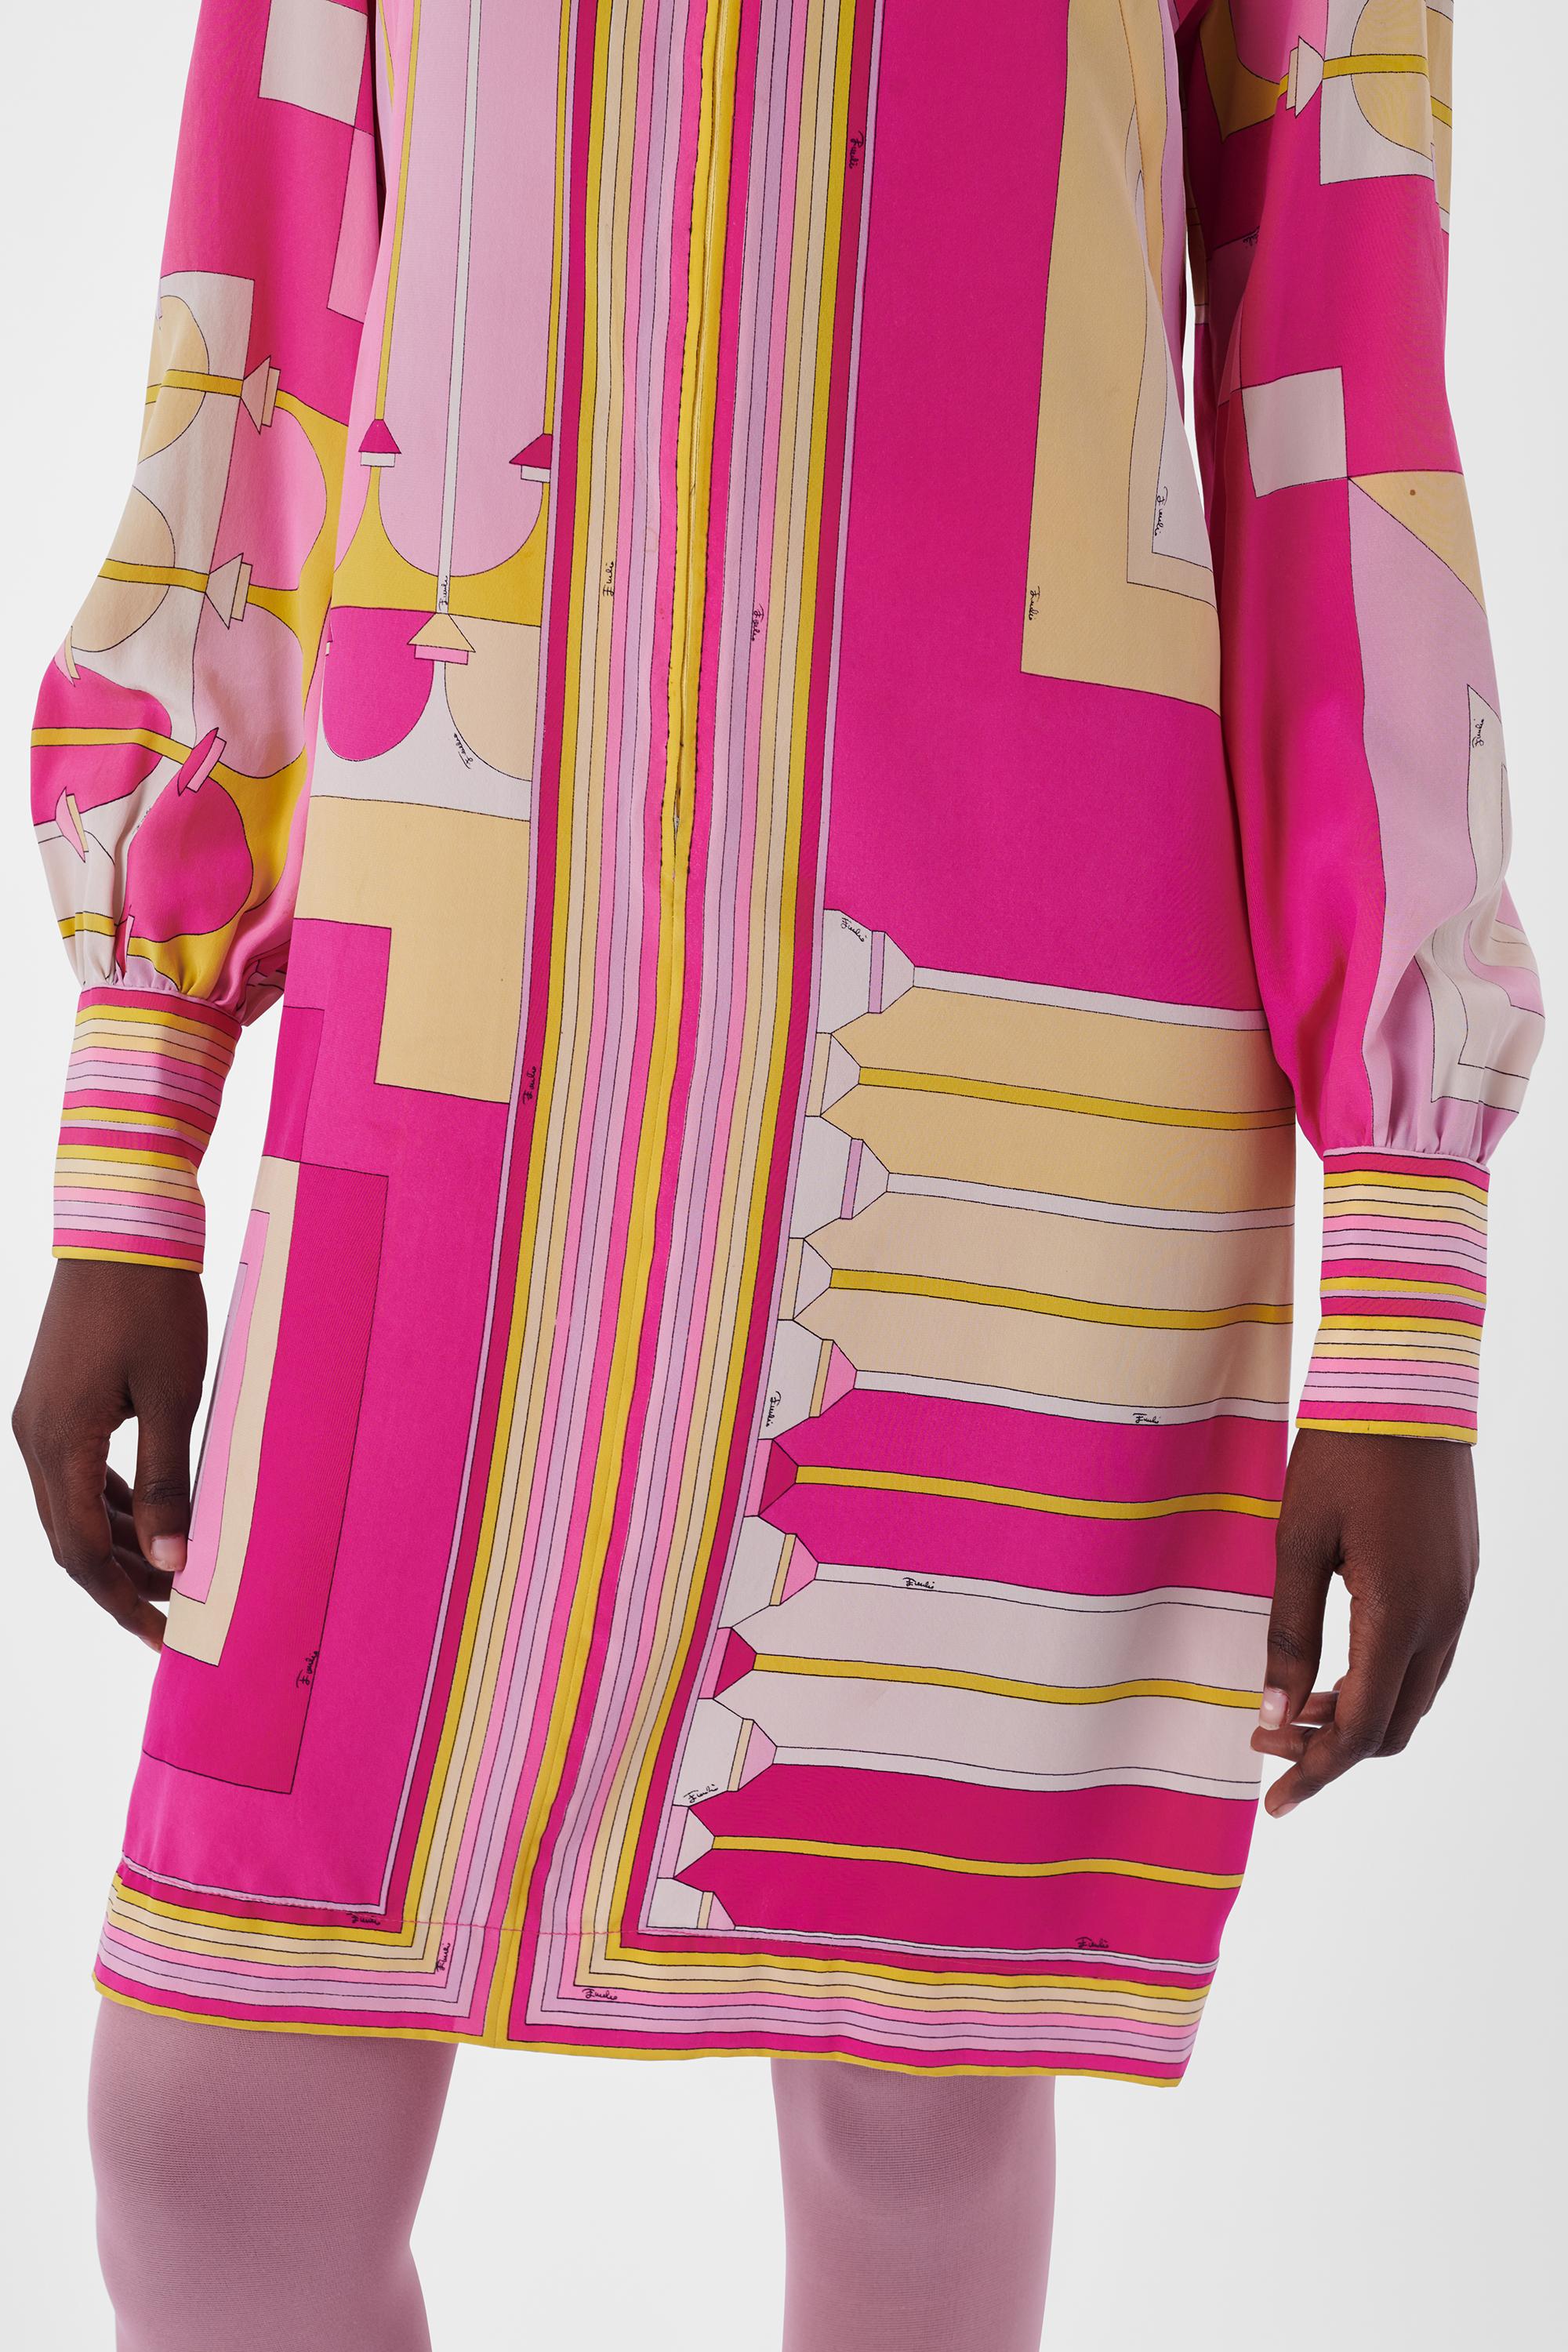 Emilio Pucci 1960's Pink Silk Zip Up Dress In Good Condition For Sale In London, GB